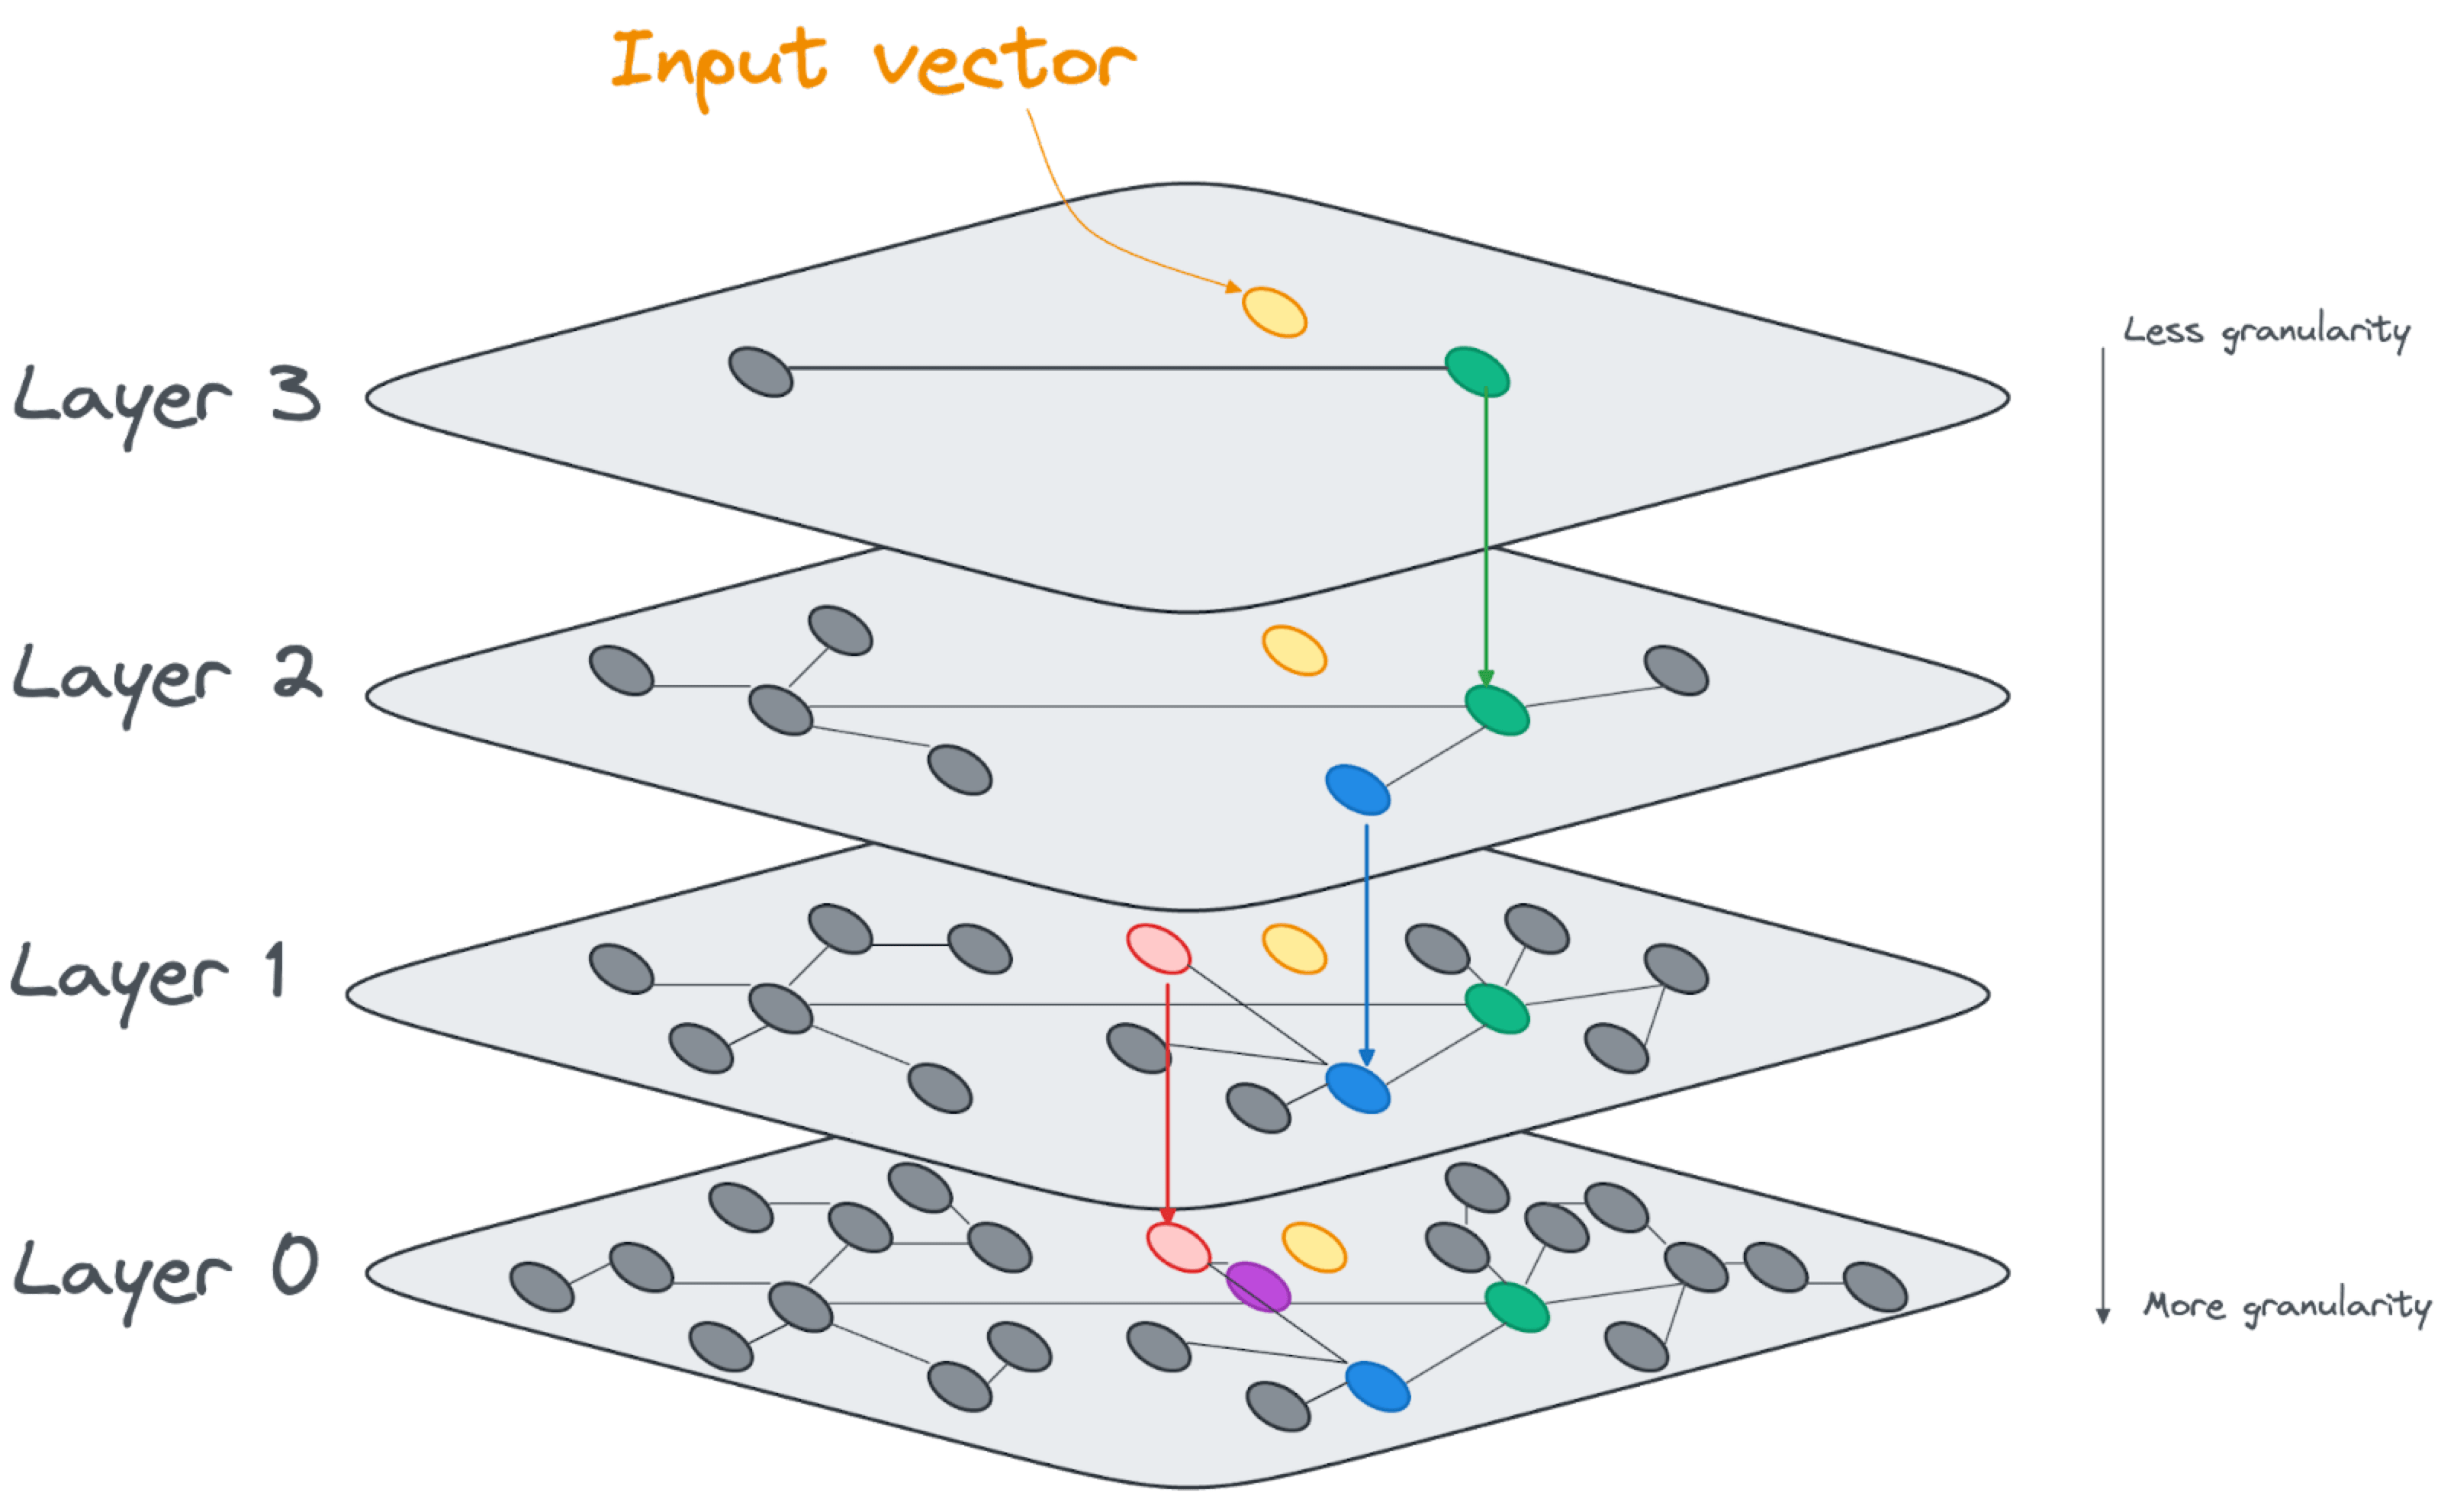 The graph shows the layers of the HNSW index. The search path passes through a vector that links the layers, and then through the vectors connected to that vector on the lower layer. There are four layers of increasing vector density.